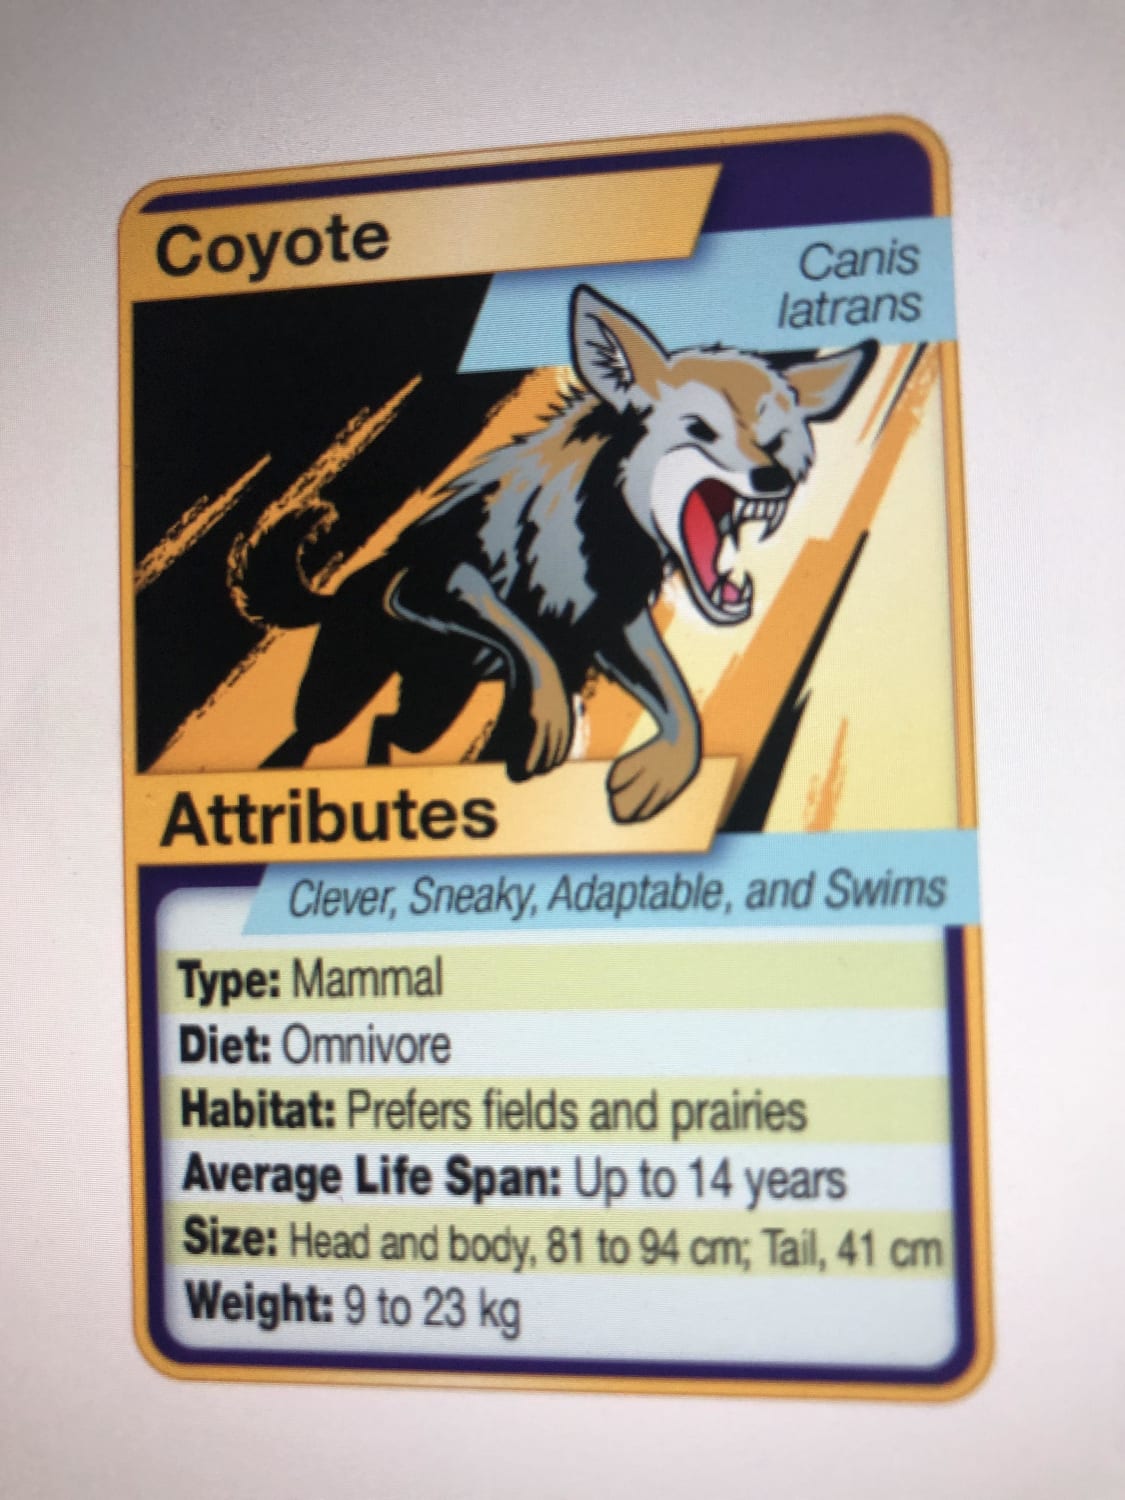 Didn’t know I wanted Pokémon-styled animal cards, sounds like a good tool for learning!